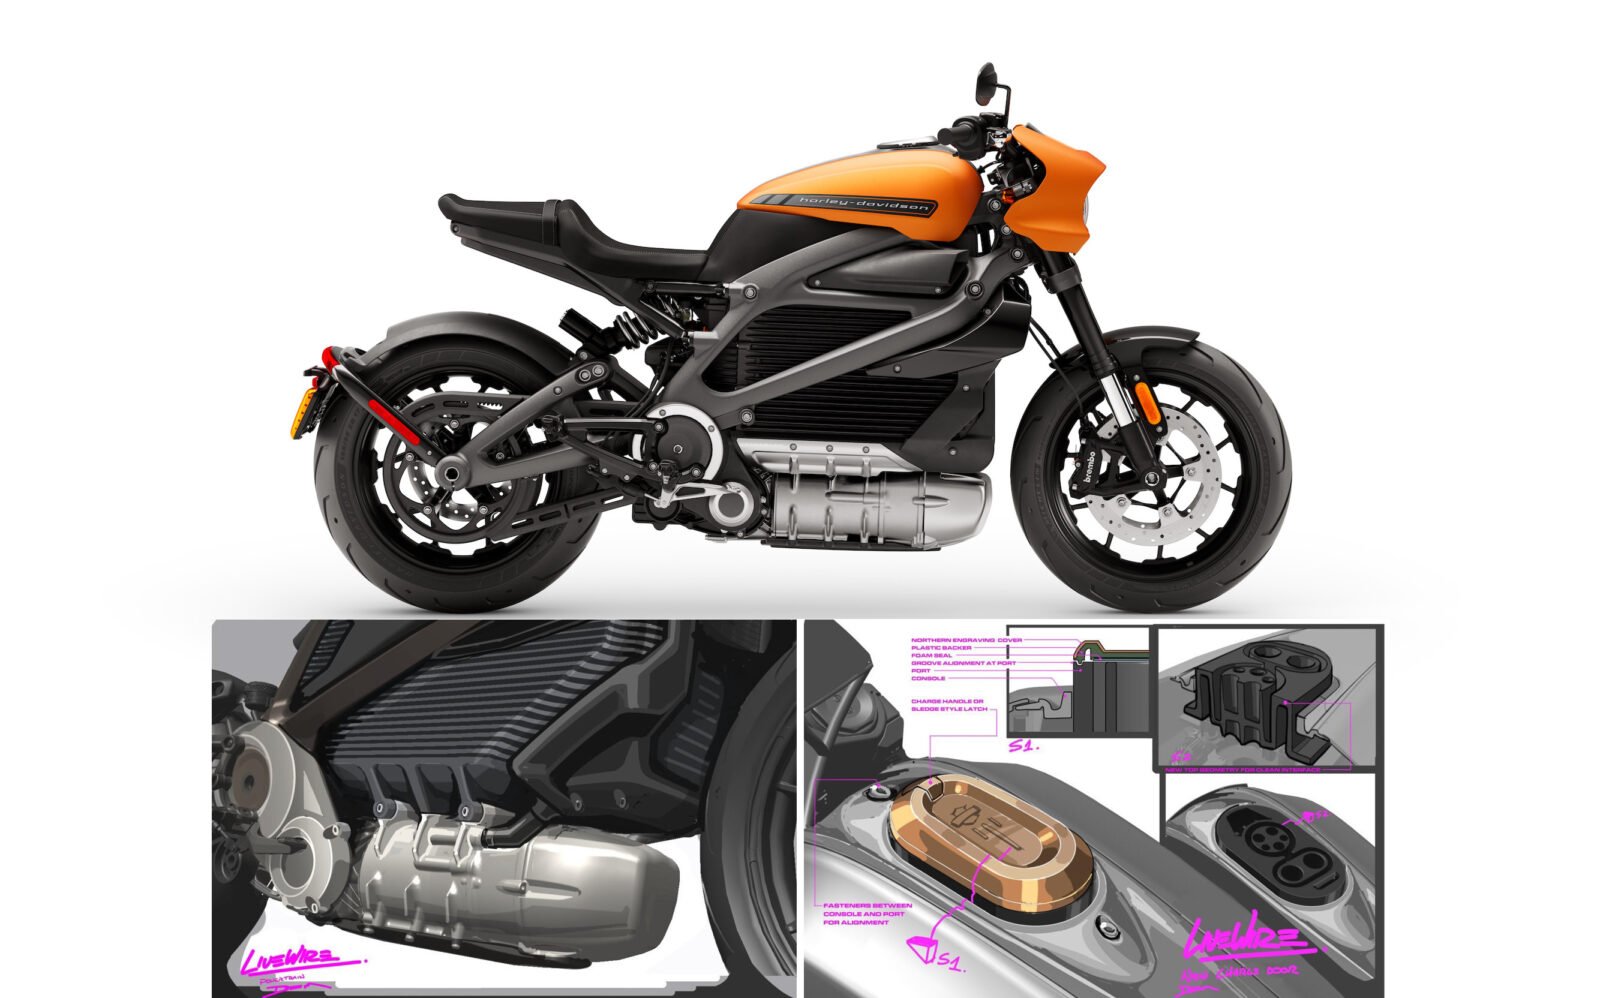 A Conversation With The Designers Of The Harley Davidson Livewire